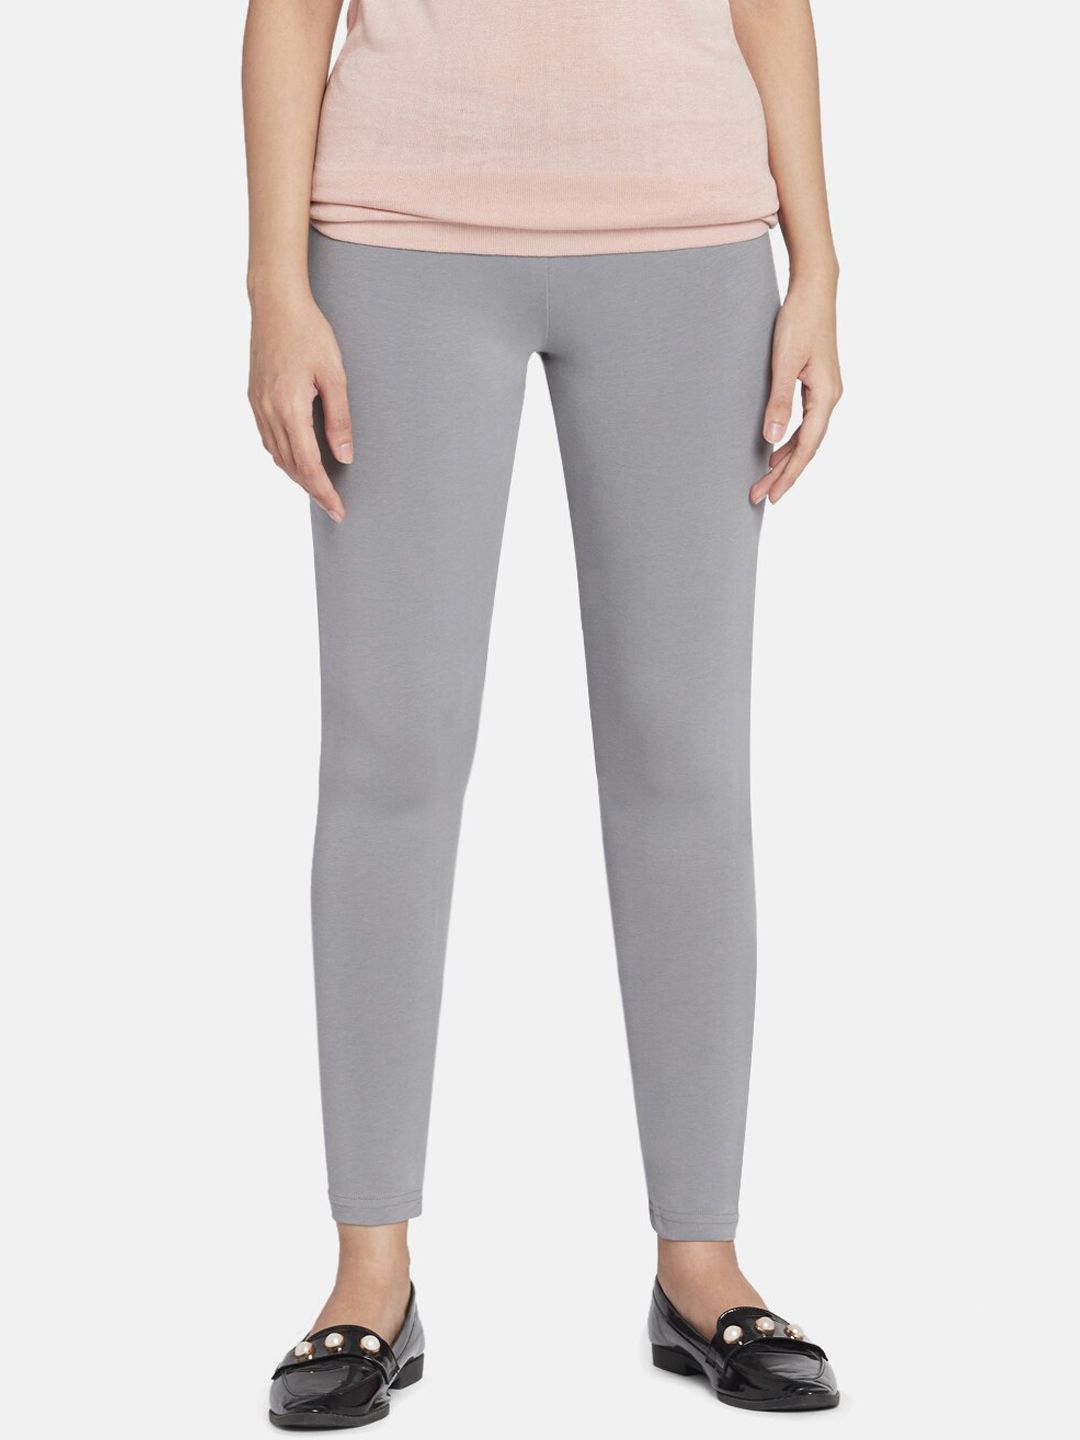 Go Colors Women Grey Solid Ankle-Length Leggings Price in India